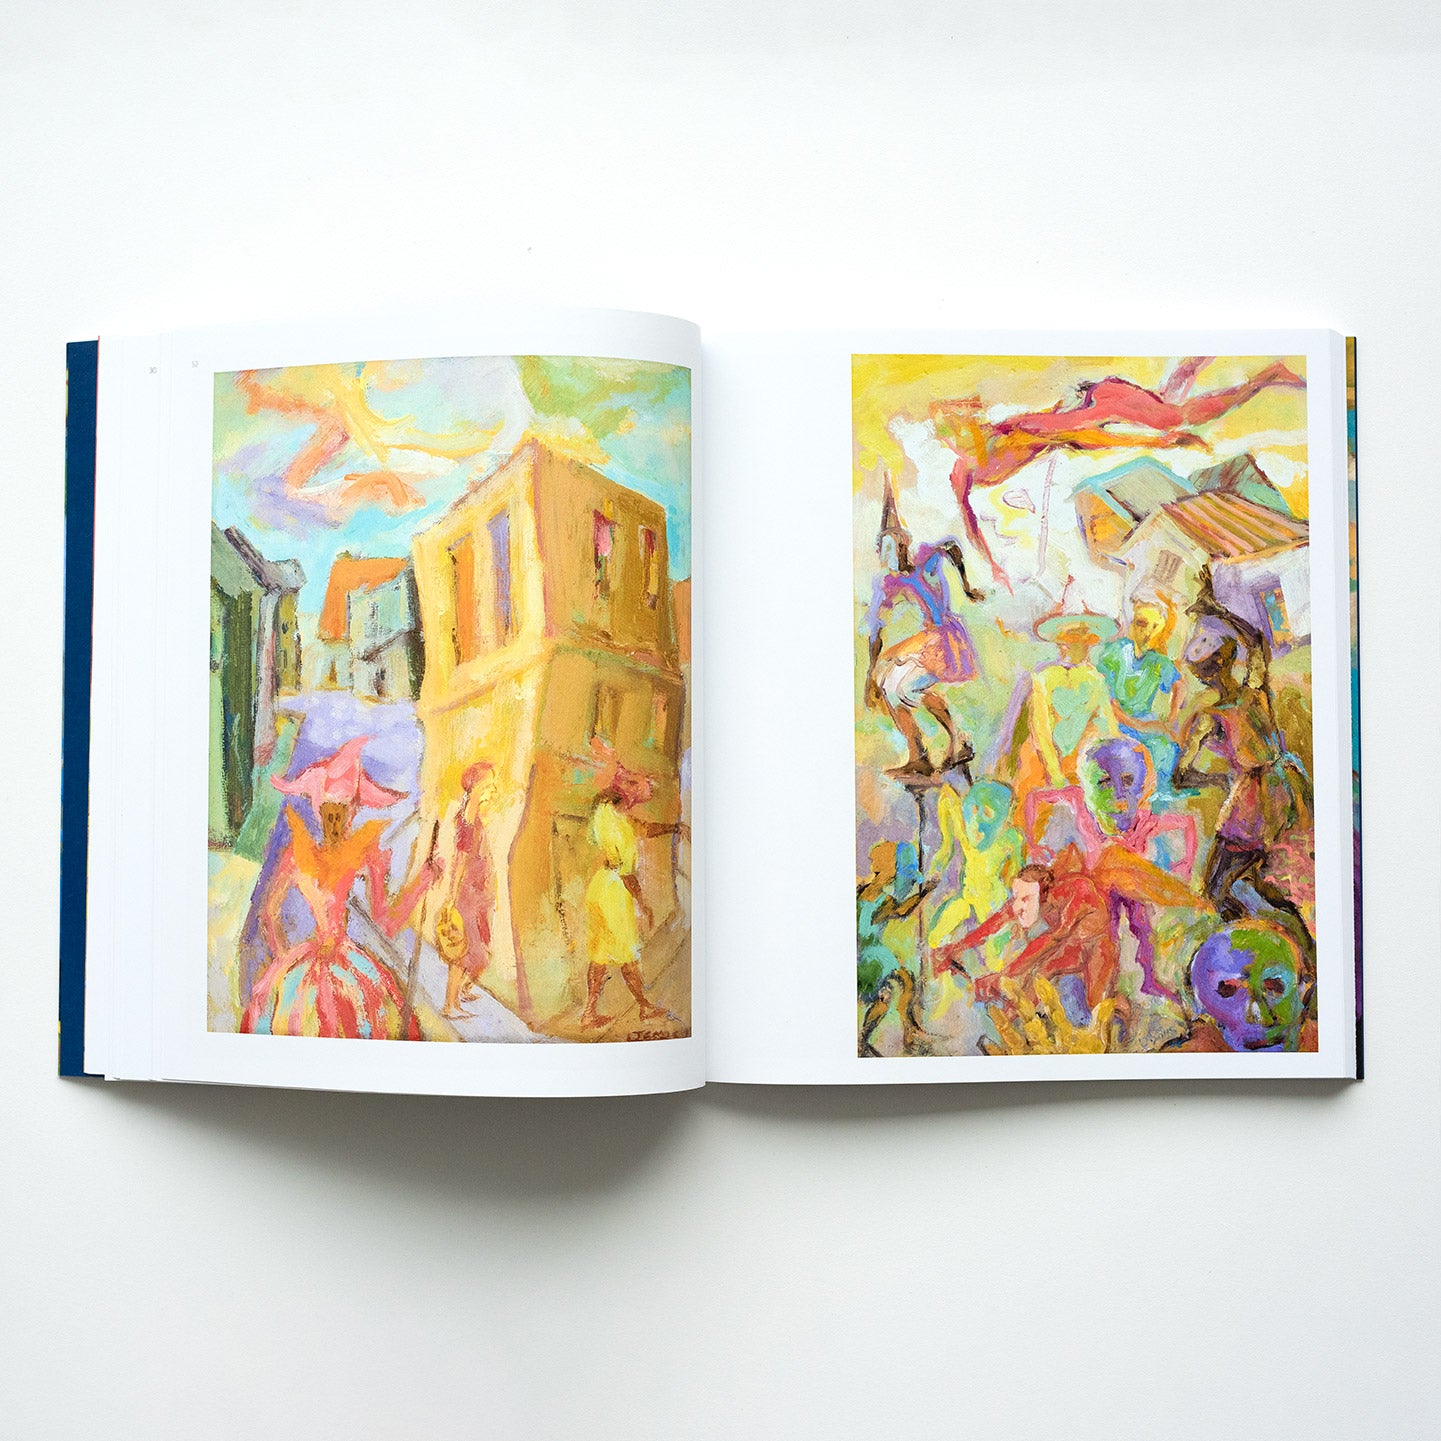 Inside pages of John Lyons catalogue featuring two vibrant paintings by the artist.